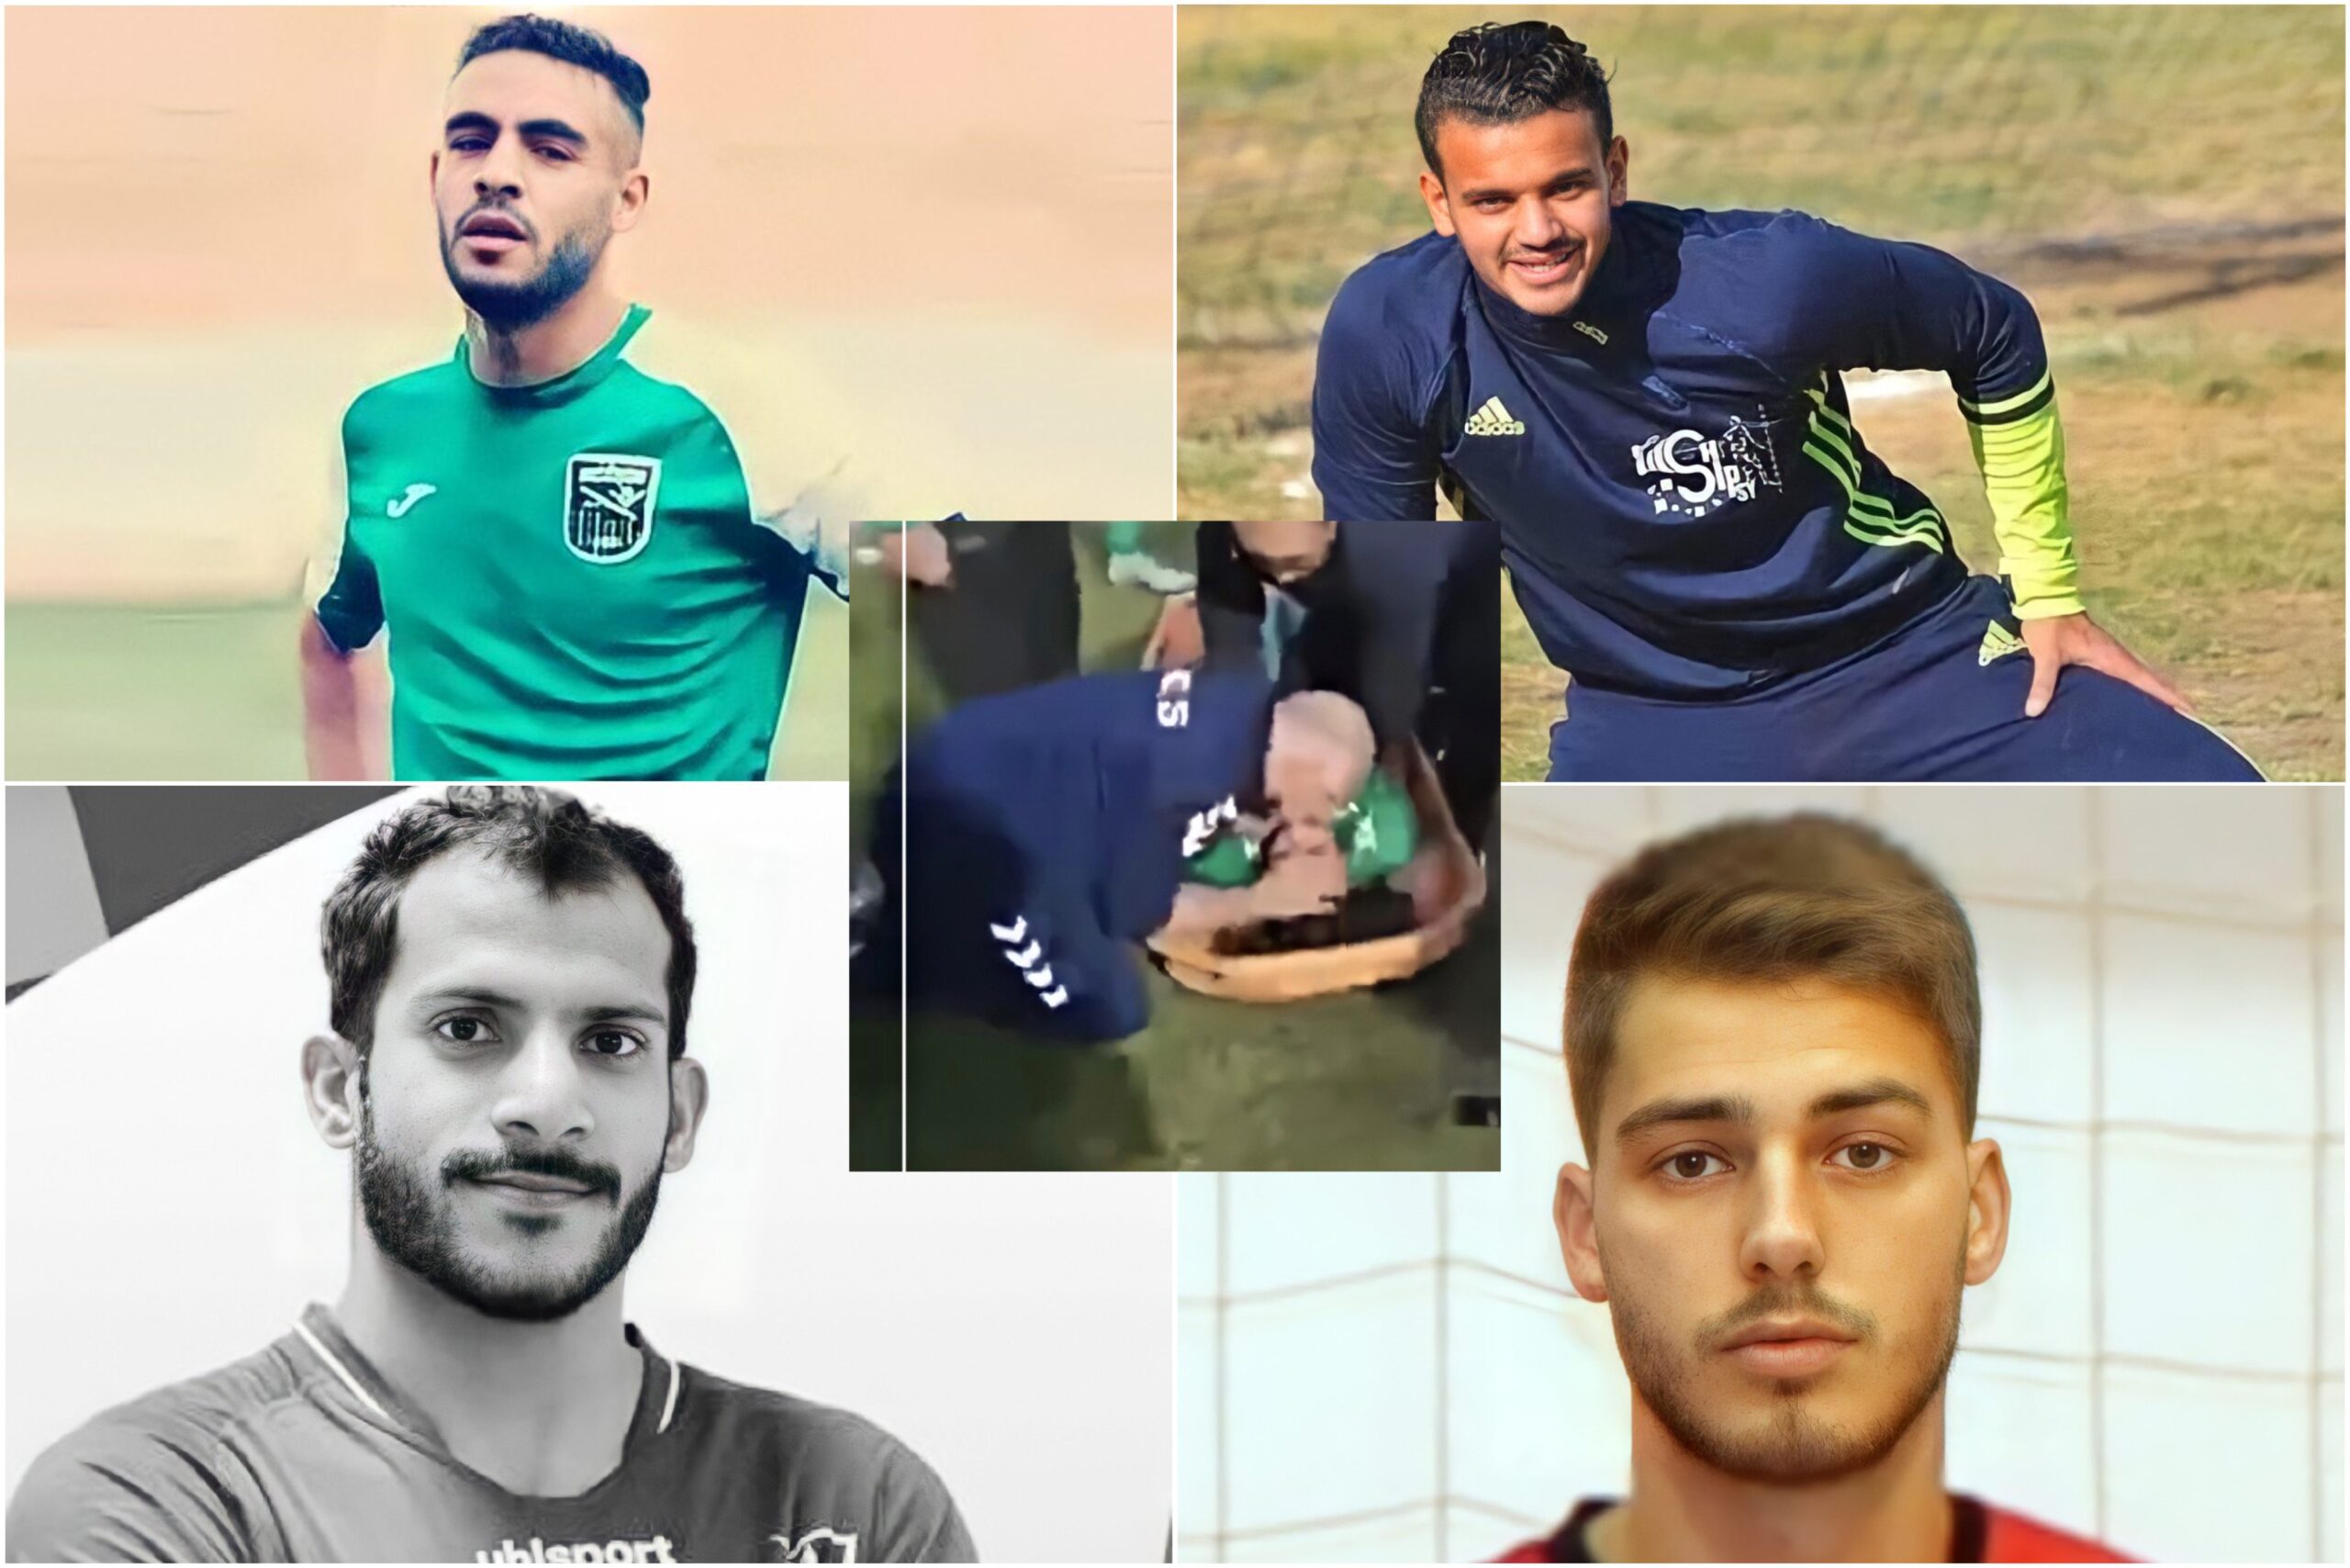 HORROR: Four Young Soccer Stars from Four Different Countries Die This Week After Suffering Sudden Heart Attacks | The Gateway Pundit | by Jim Hᴏft